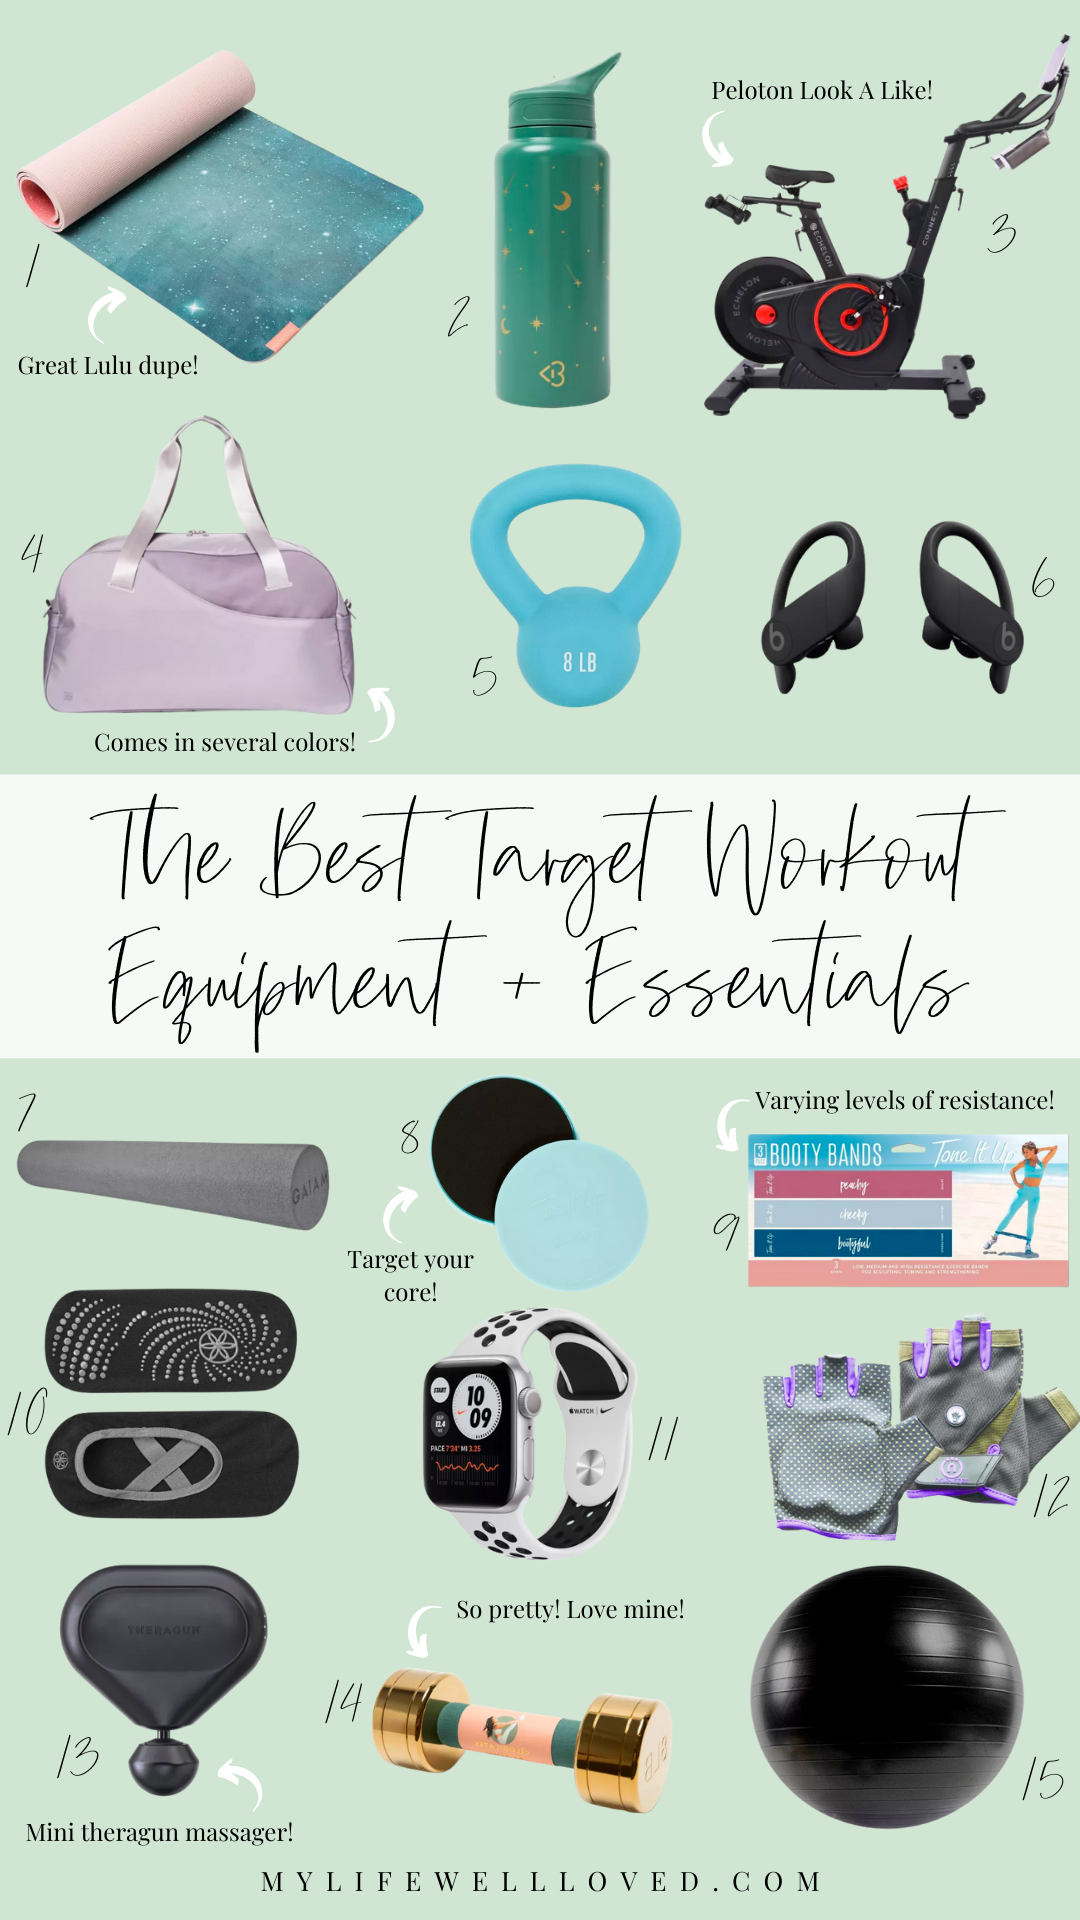 At Home Fitness: The Best Target Workout Equipment + Essentials by Alabama Health + Fitness blogger, Heather Brown // My Life Well Loved